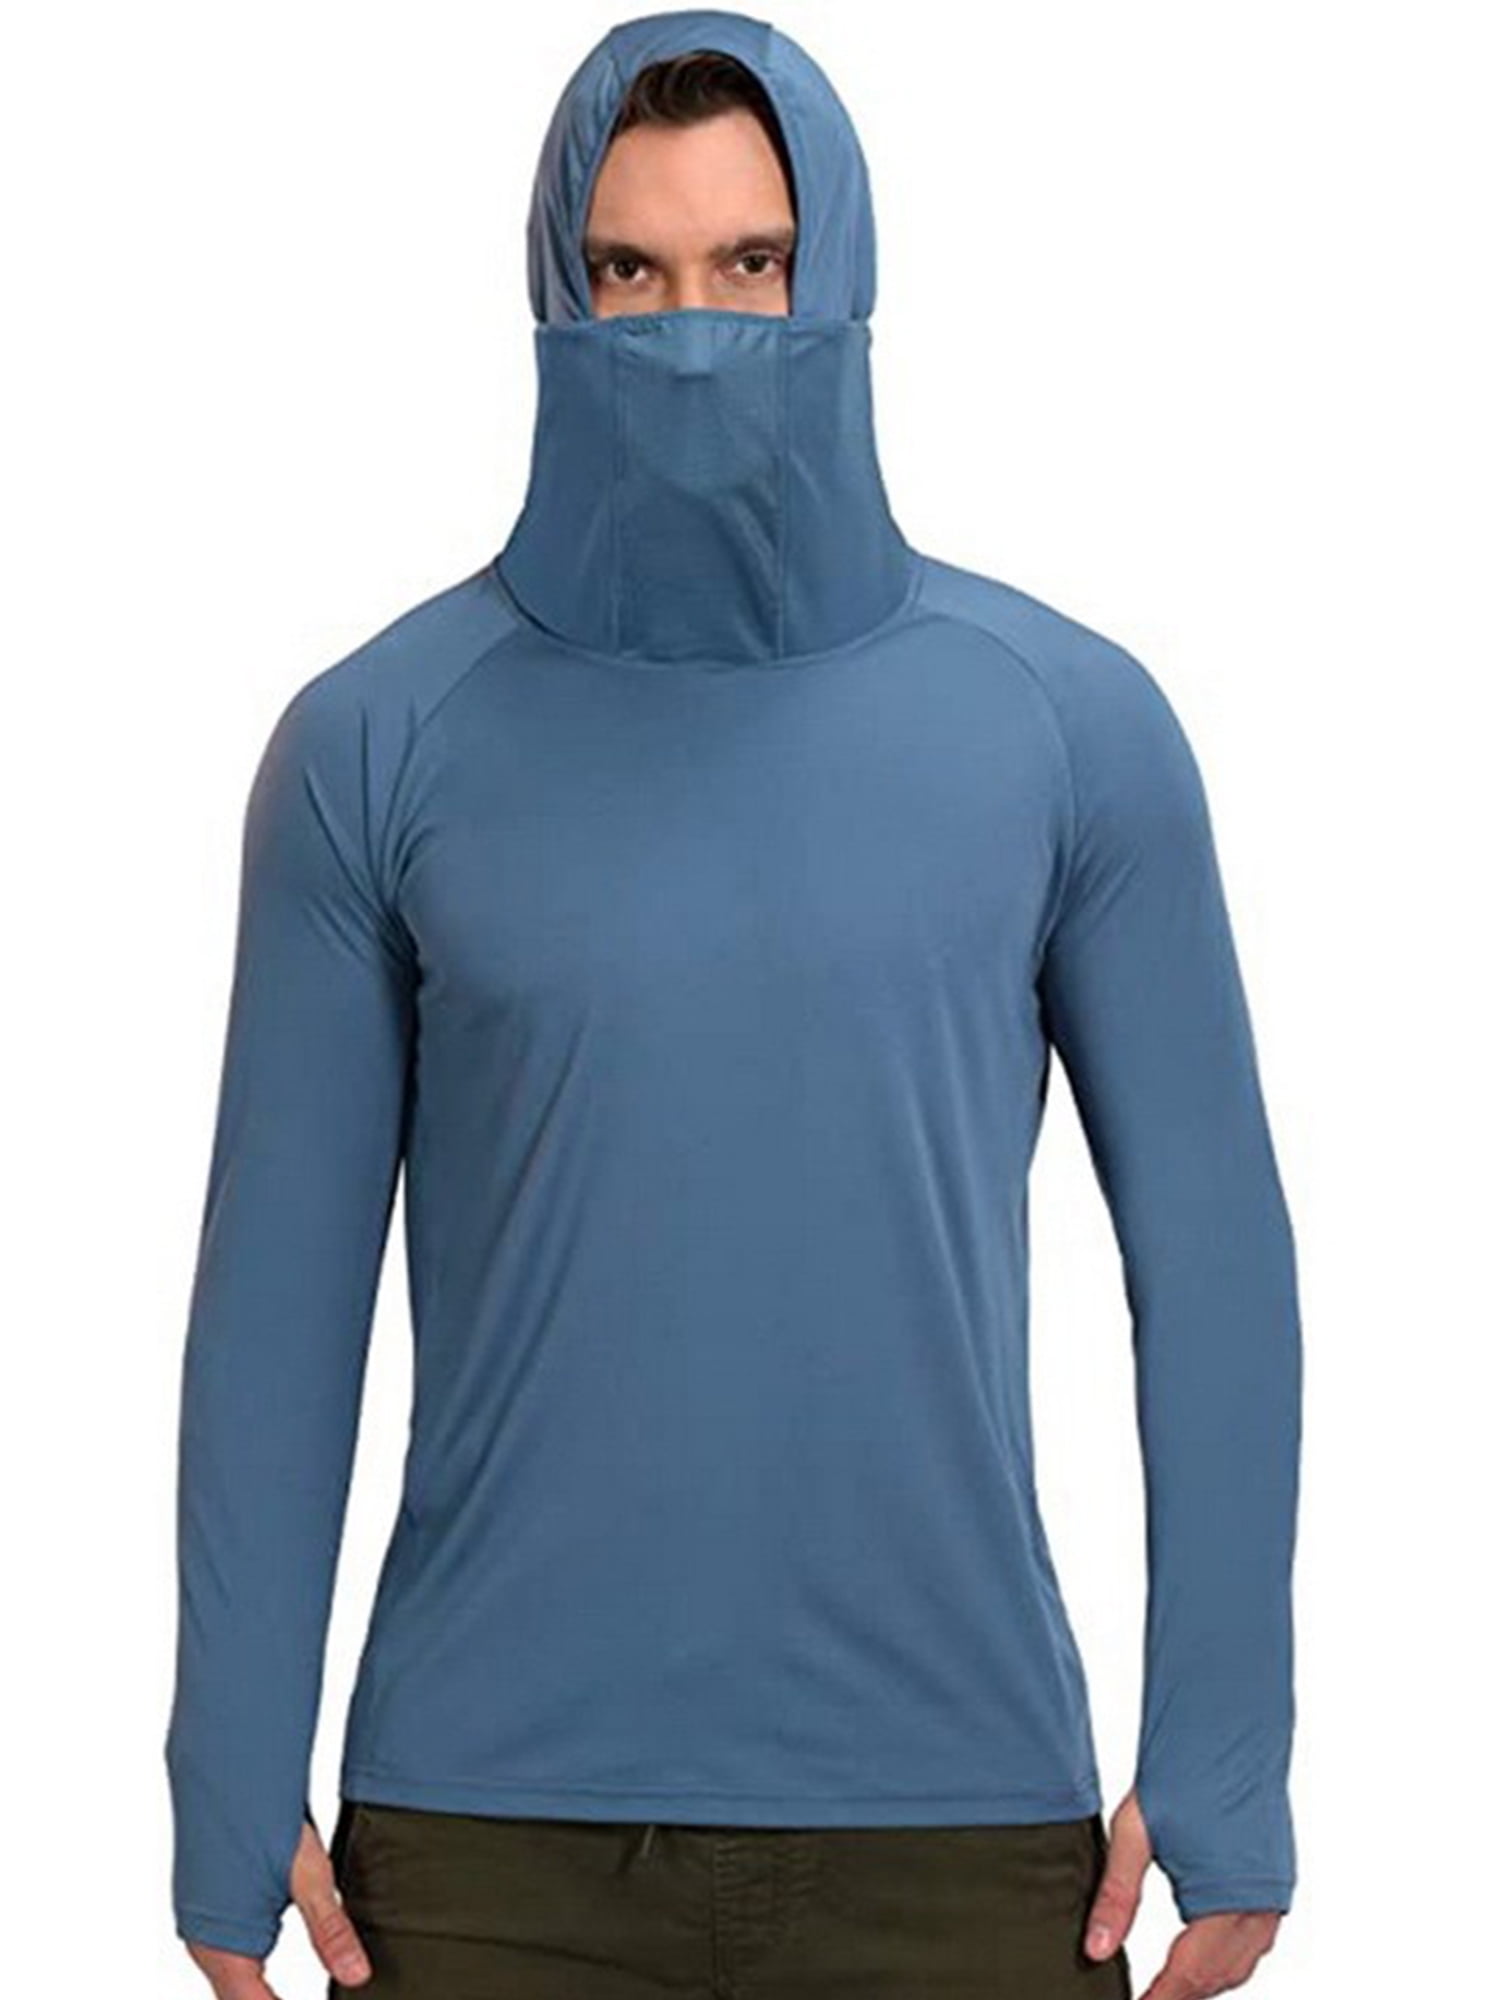 KOOFIN Performance Long Sleeve Fishing Shirt with Hood and Face Mask Neck  Gaiter UPF50 Sun Protection